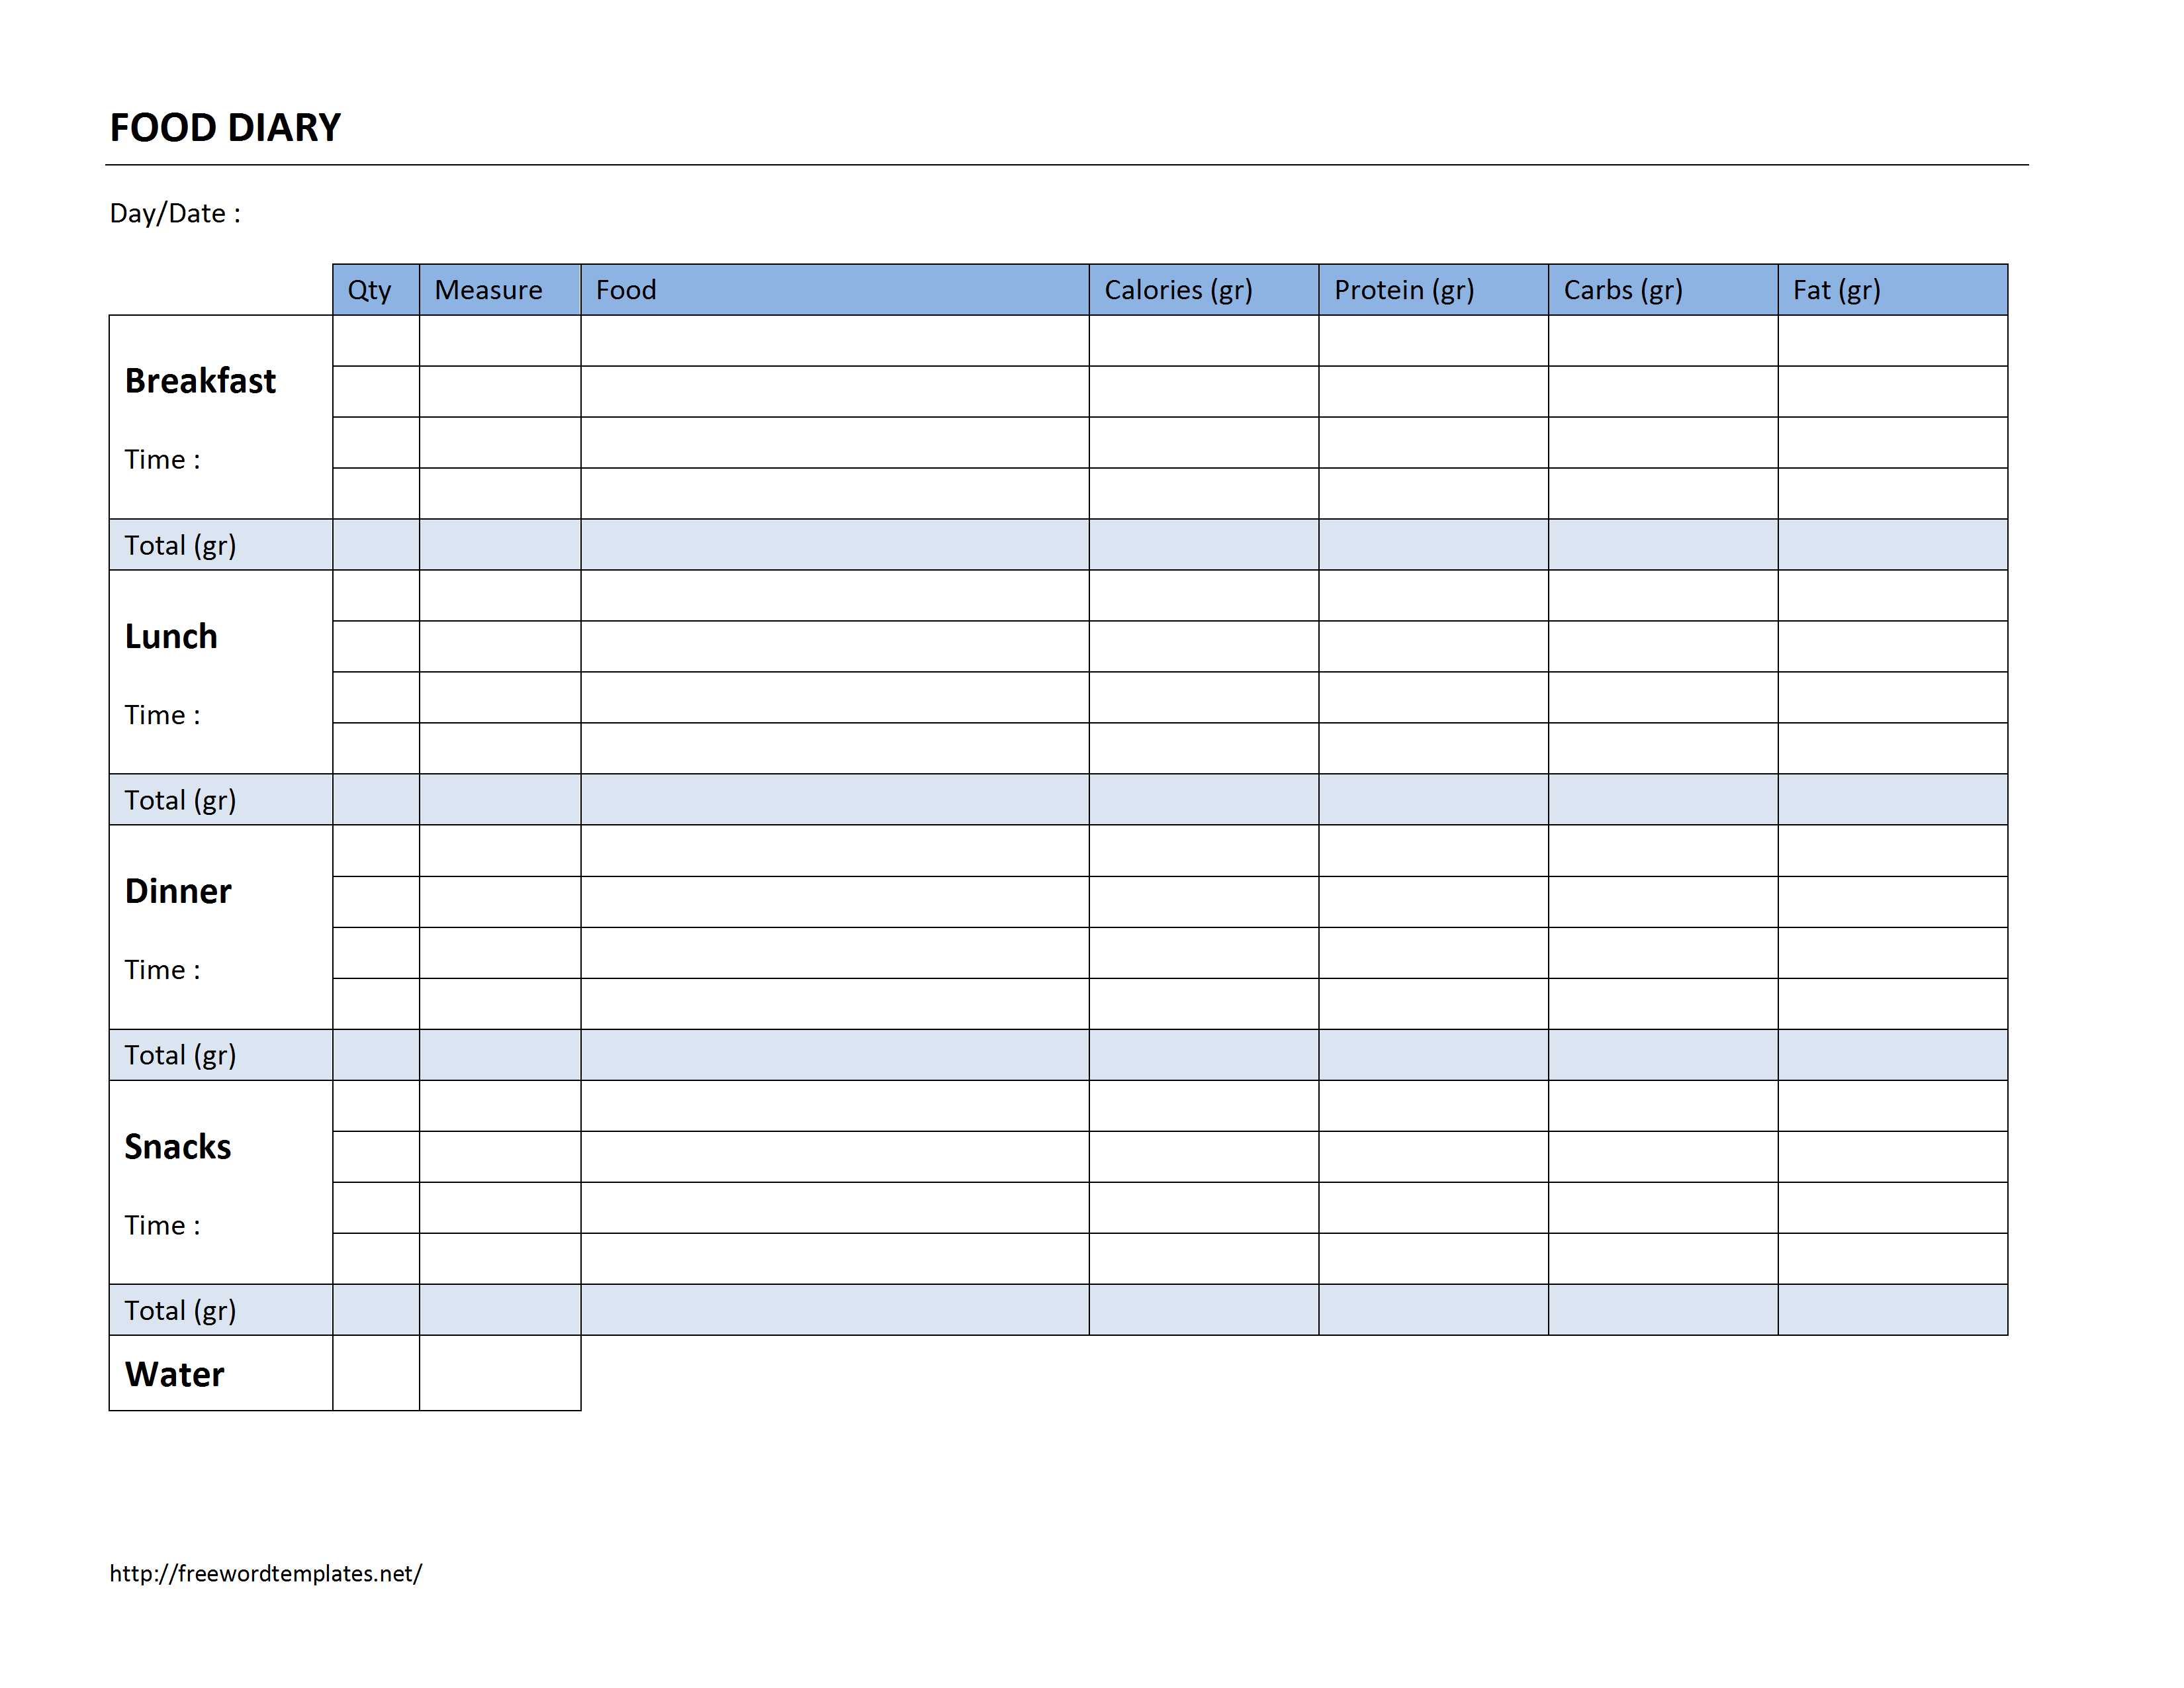 keeping a food diary template   Ecza.solinf.co